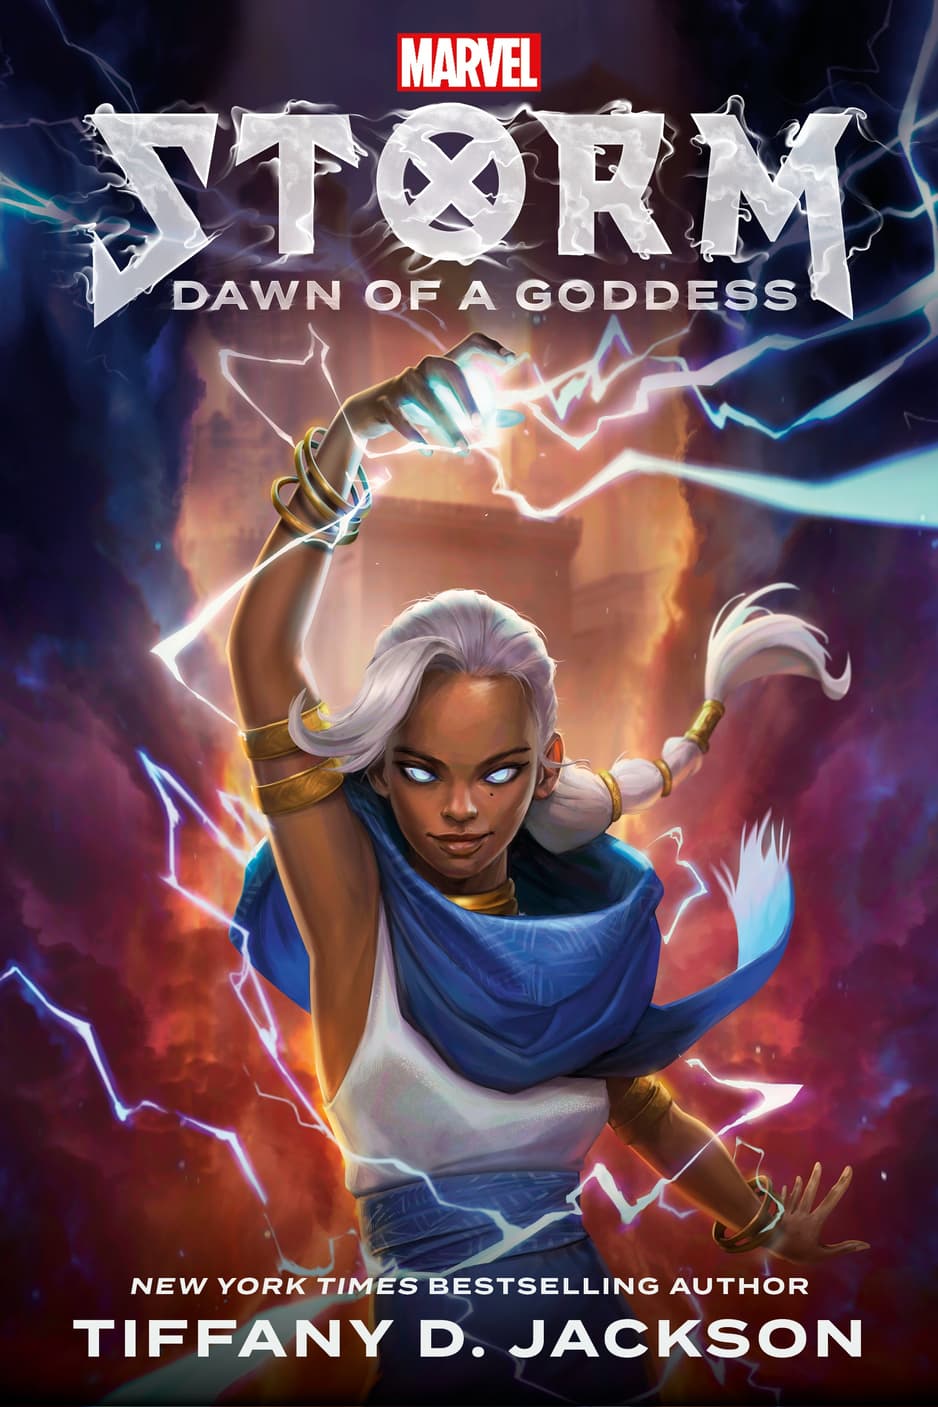 Cover to Storm: Dawn of a Goddess.